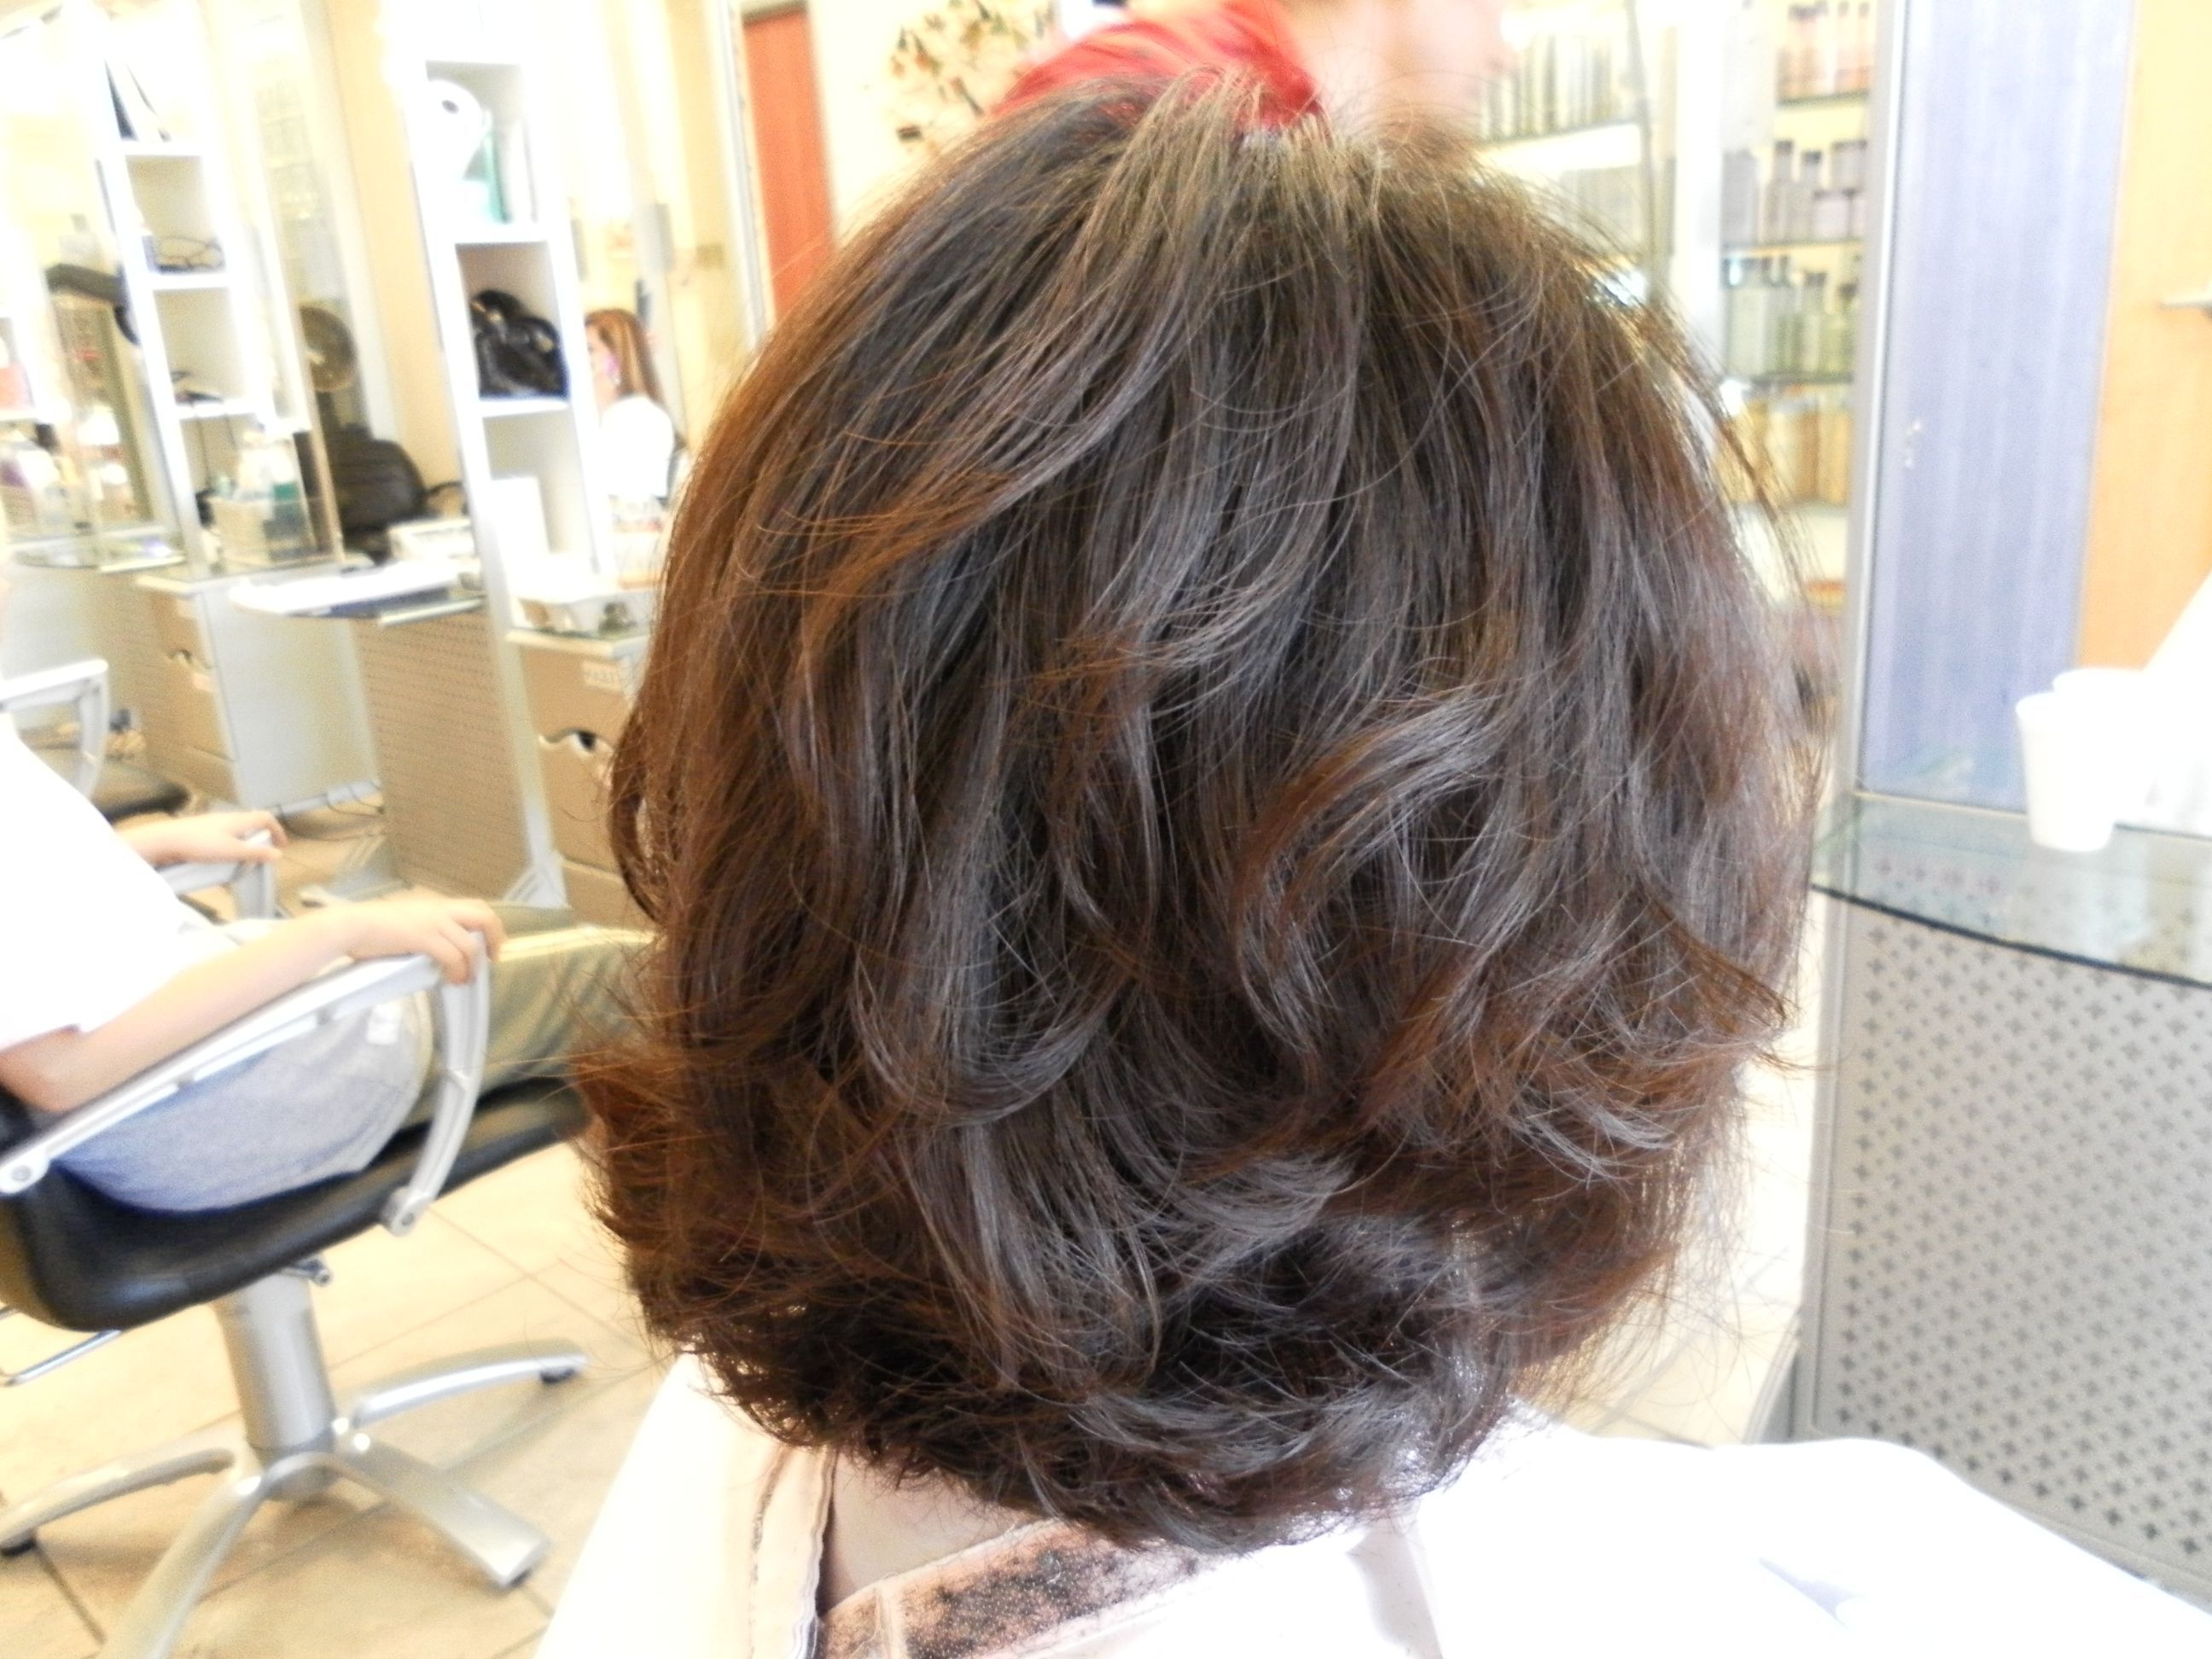 Body Wave Perm Before And After Pictures – Google Search Inside Loosely Waved Messy Brunette Bob Hairstyles (View 1 of 20)